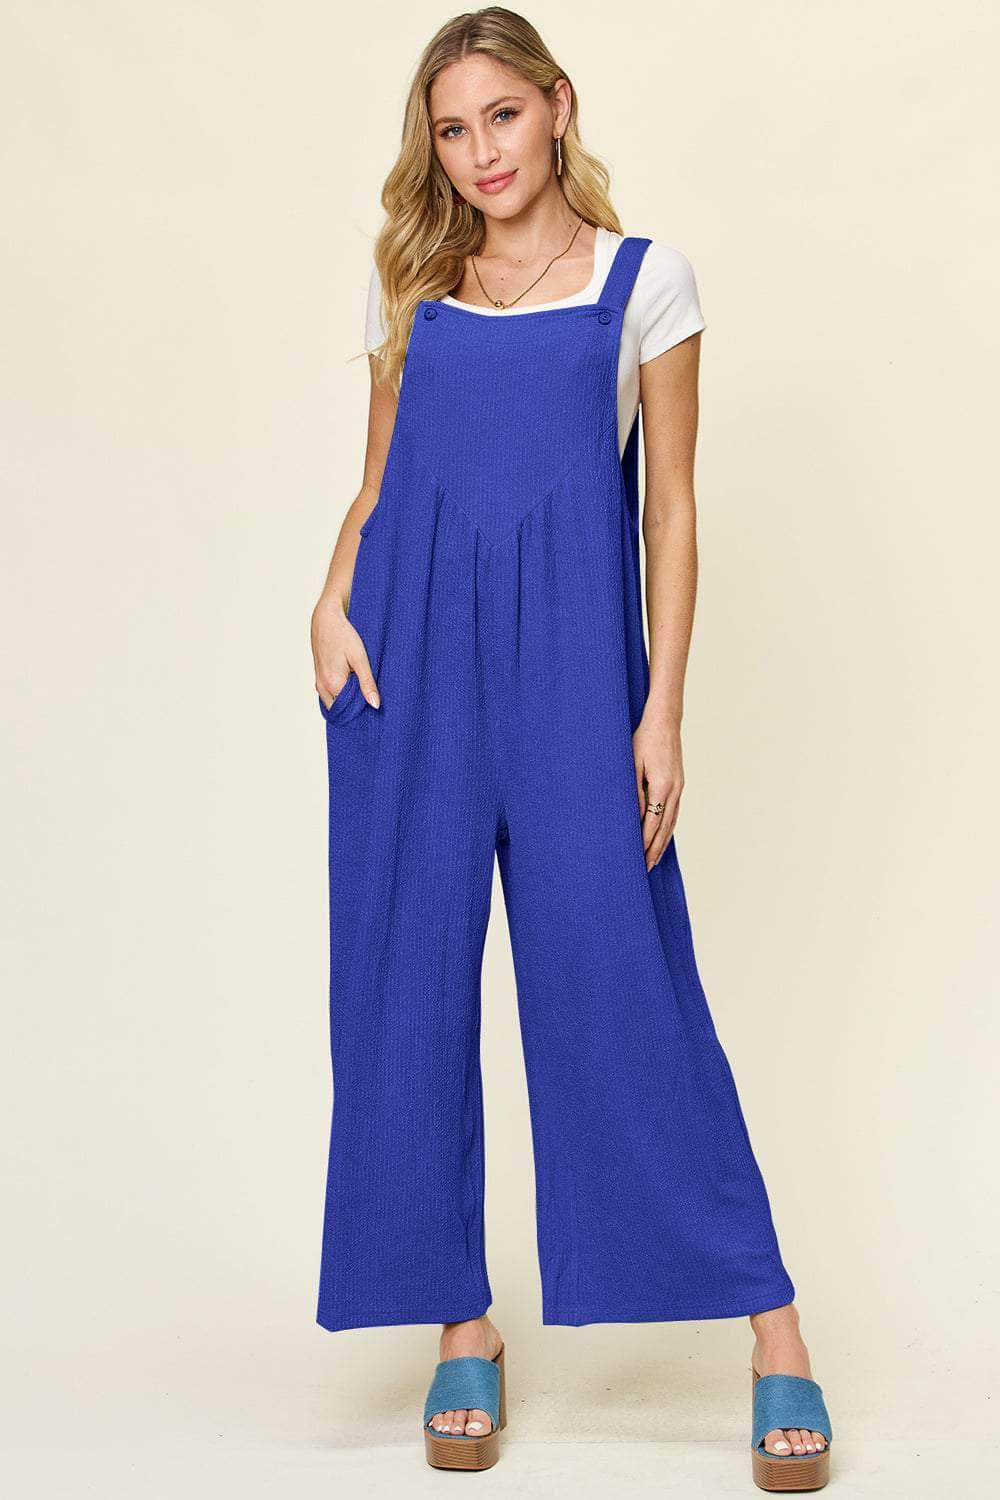 Double Take Full Size Texture Sleeveless Wide Leg Overall Royal Blue / S